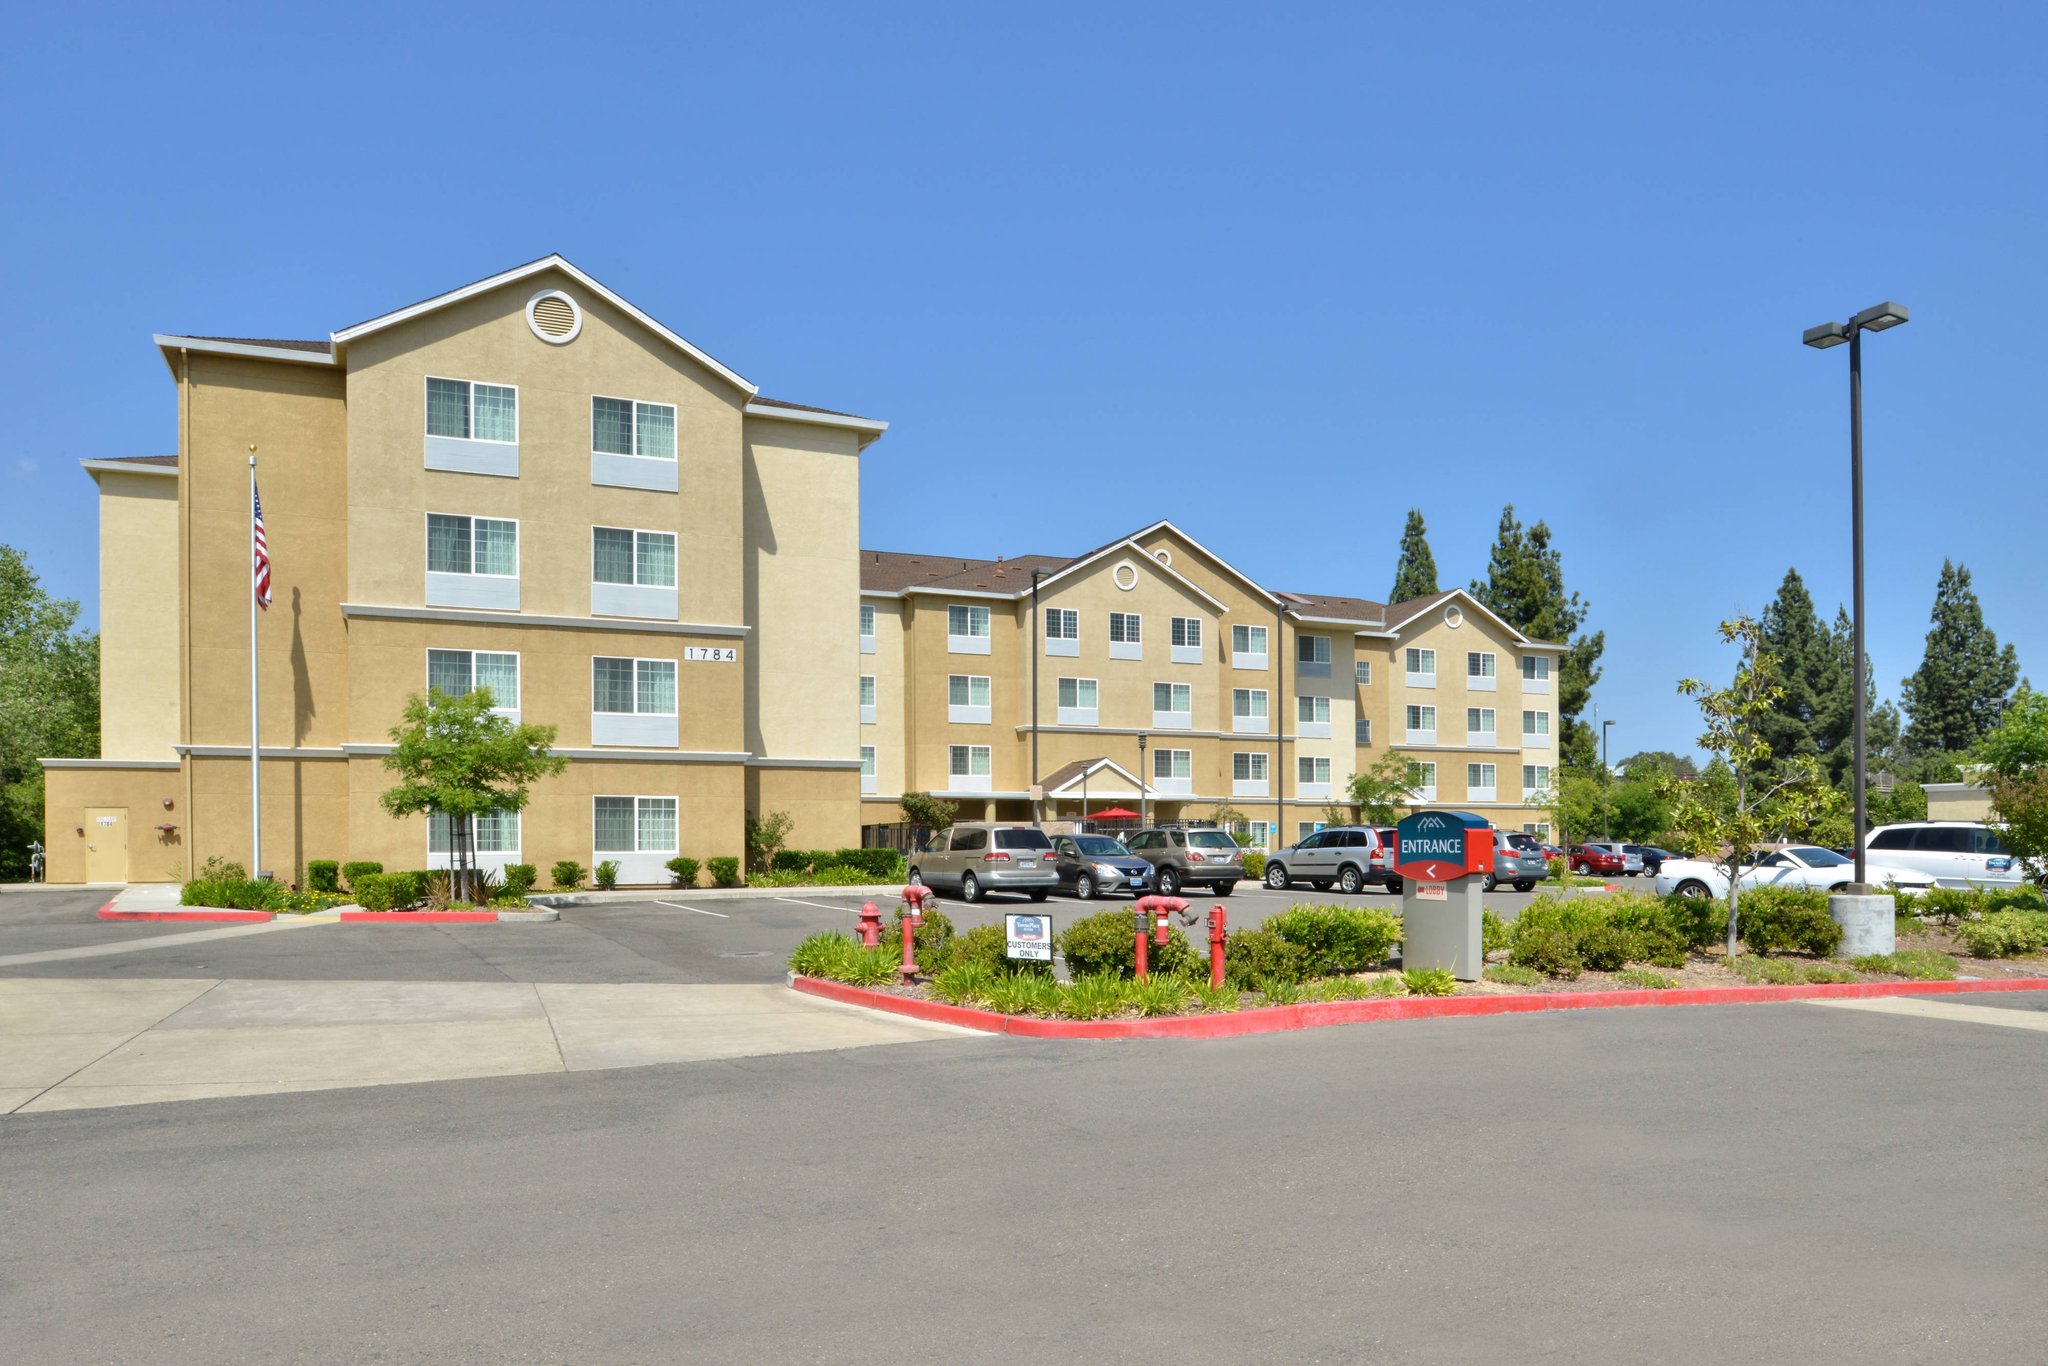 TownePlace Suites by Marriott Sacramento Cal Expo